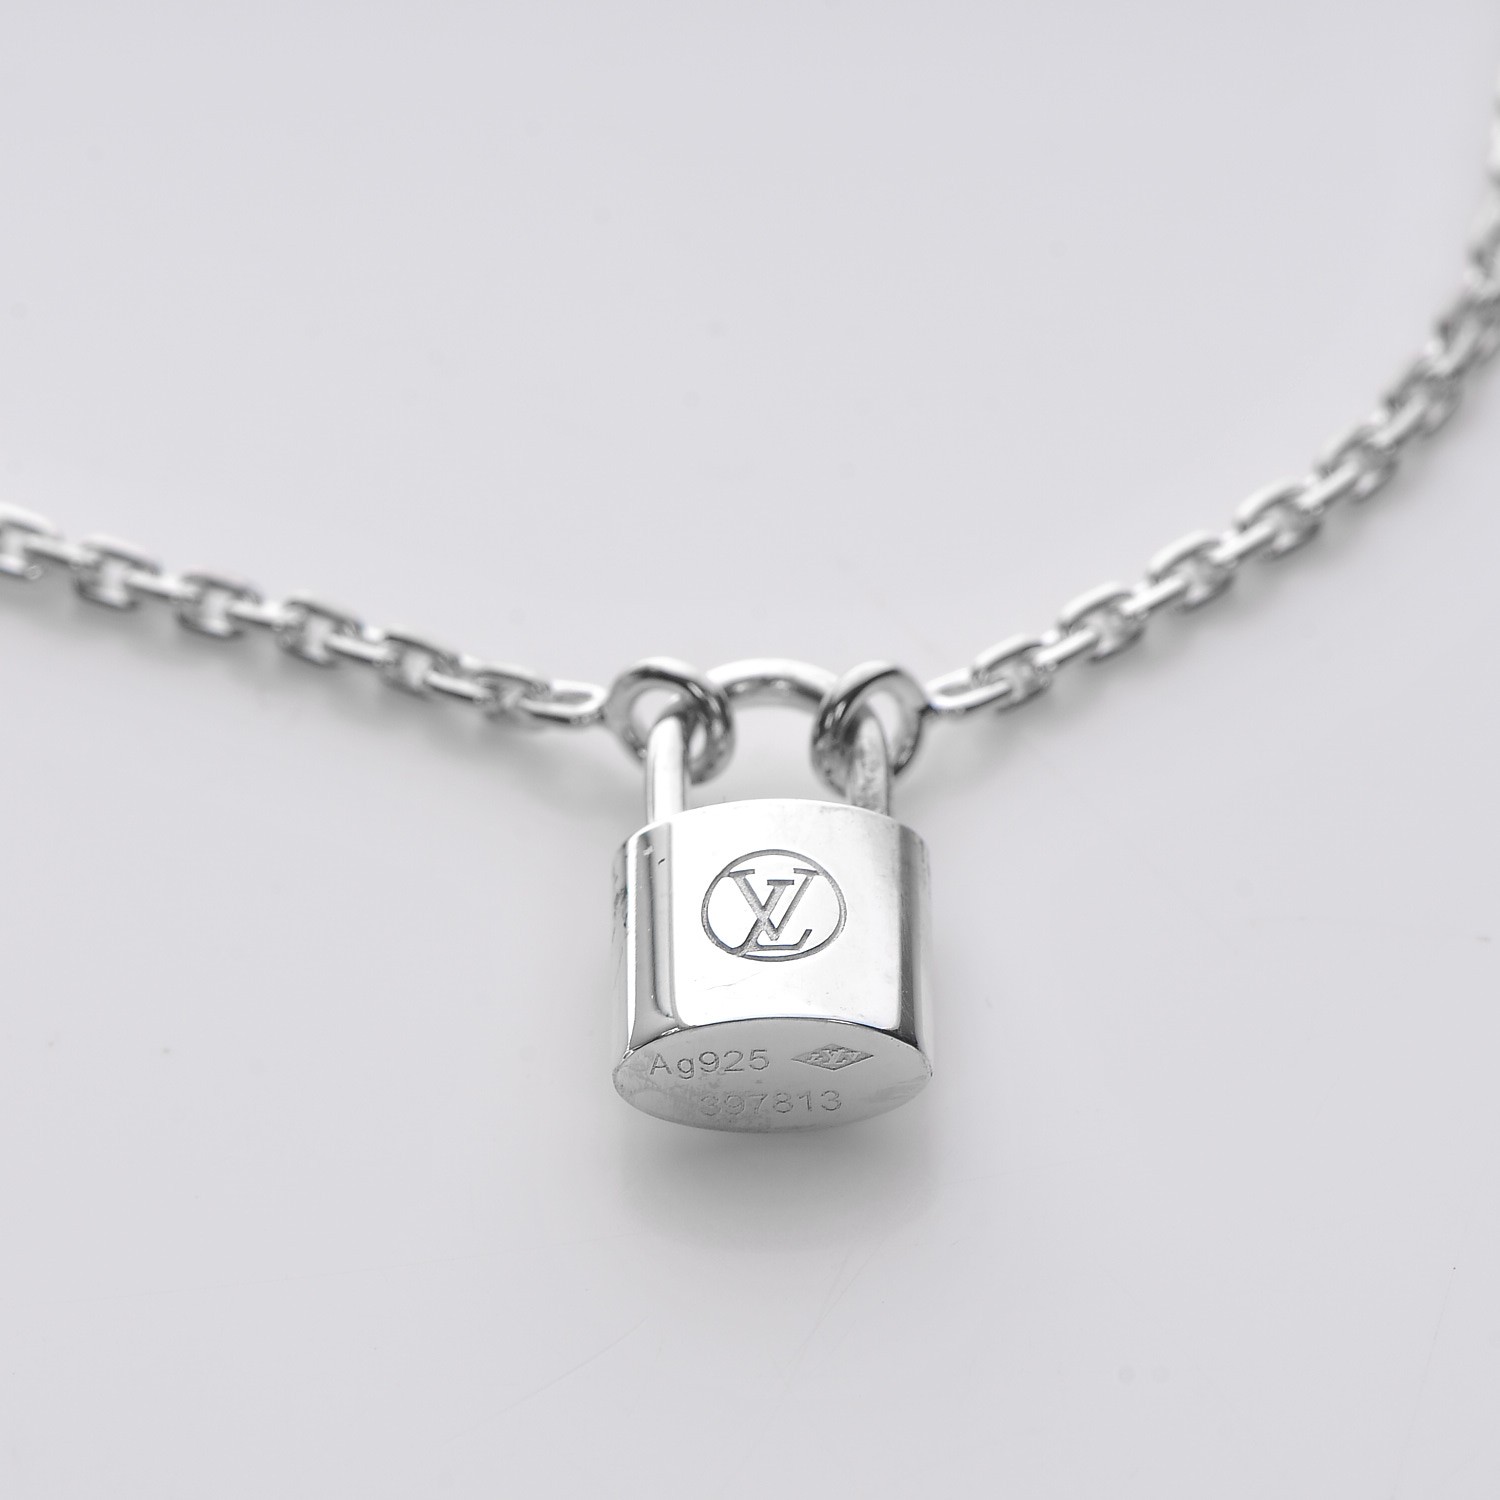 Louis Vuitton for UNICEF: New Silver Locket Bracelet by Sophie